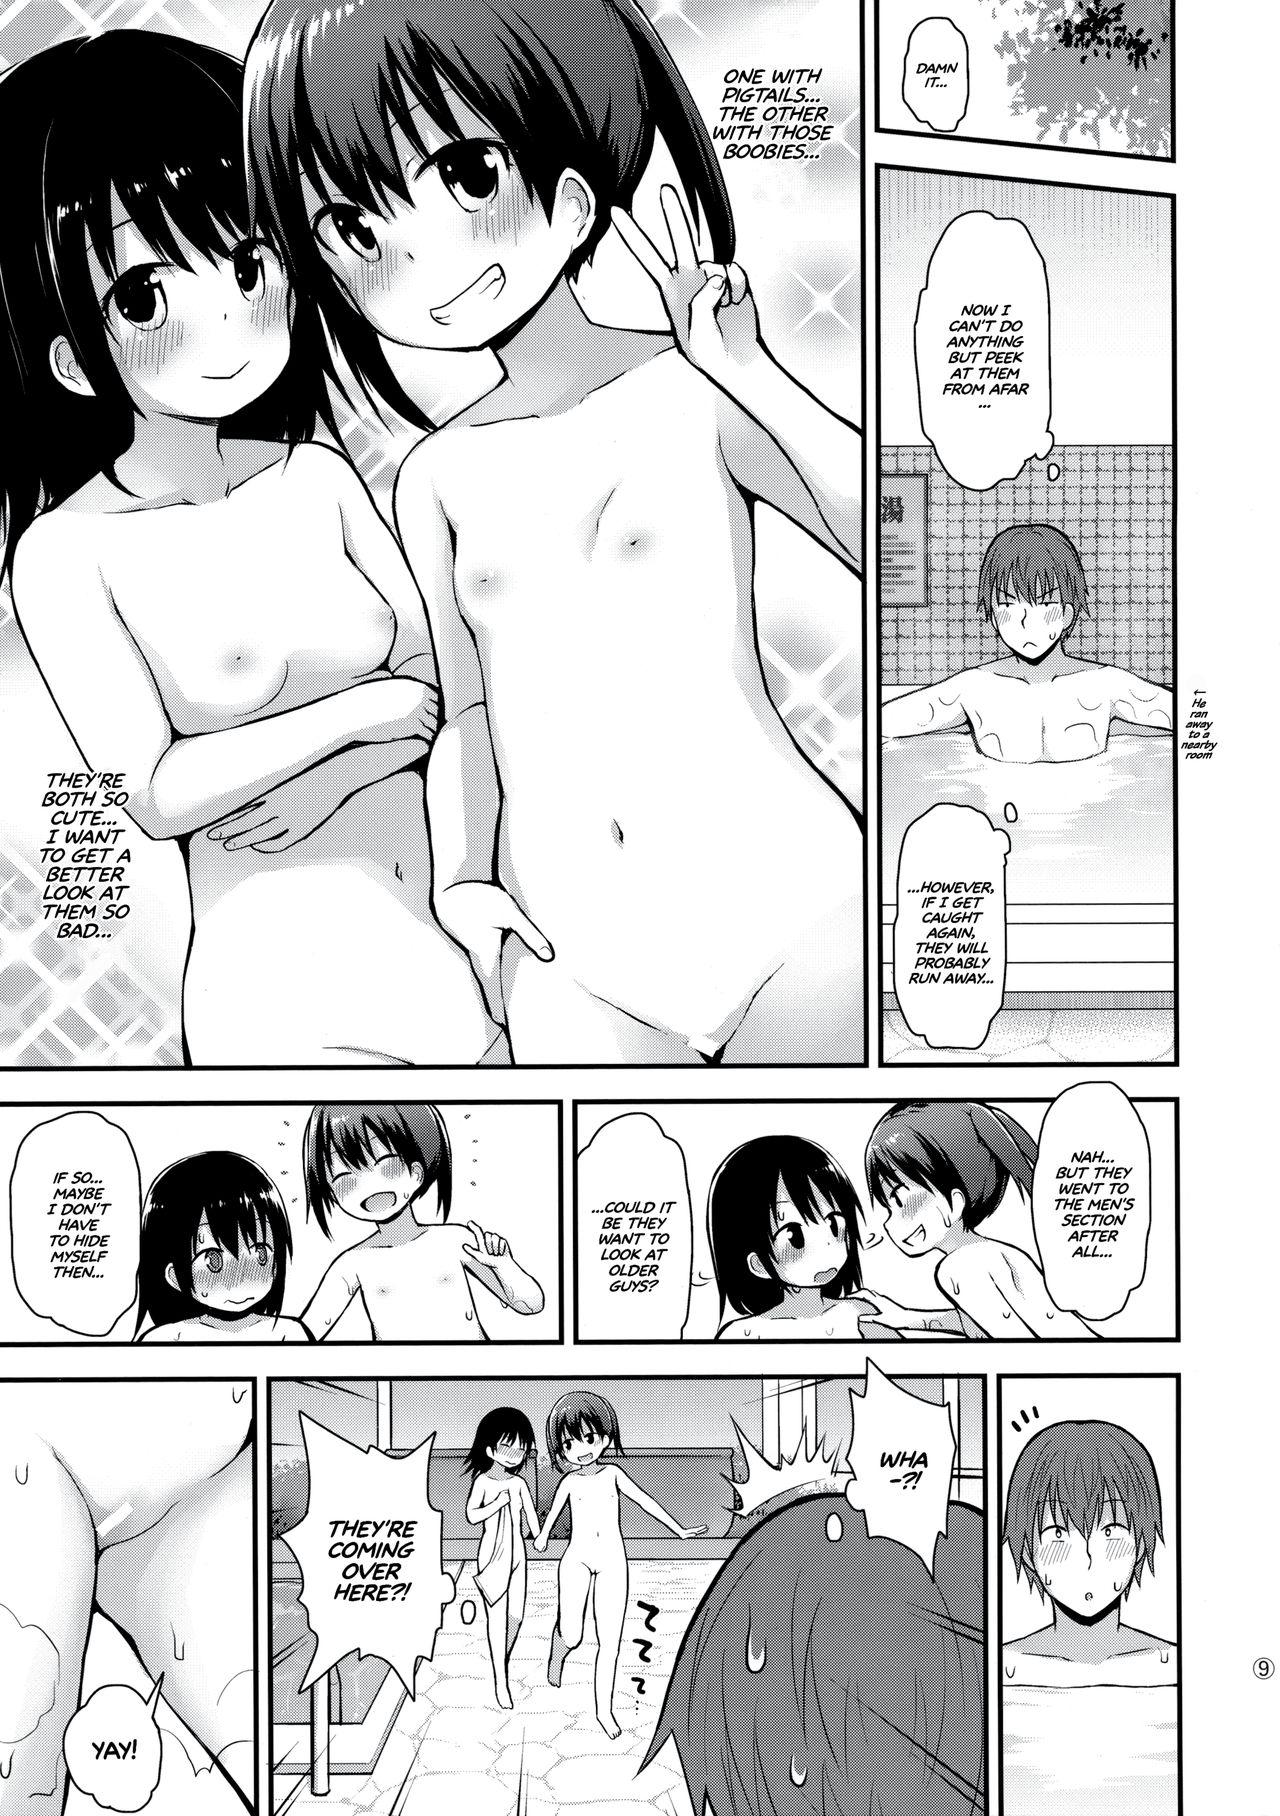 For Onnanoko datte Otokoyu ni Hairitai | They may just be little girls, but they still want to enter the men's bath! - Original Fuck My Pussy Hard - Page 8